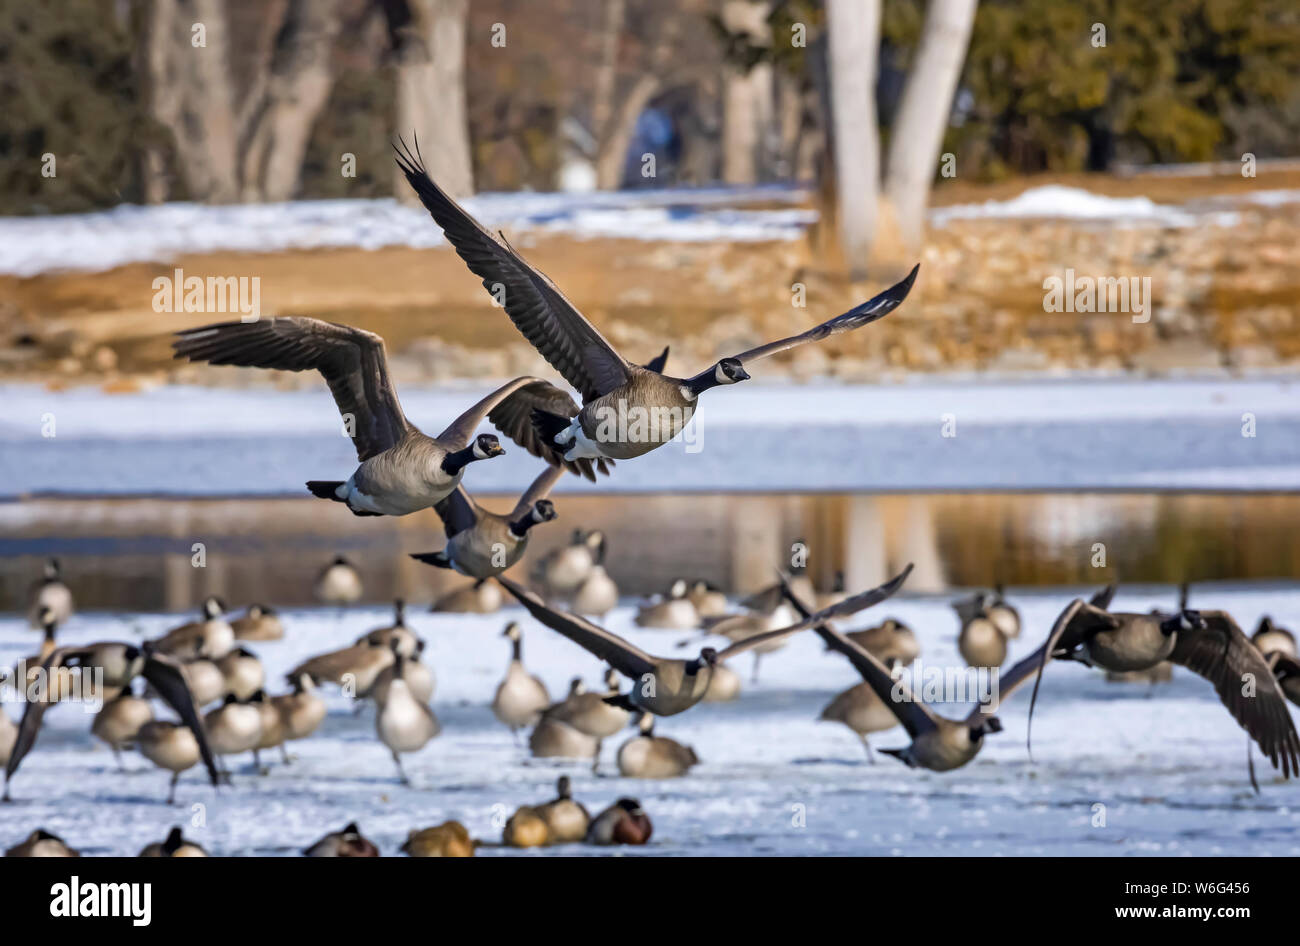 Canada geese (Branta canadensis) taking flight while geese and ducks stand on the snow and ice in the background Stock Photo